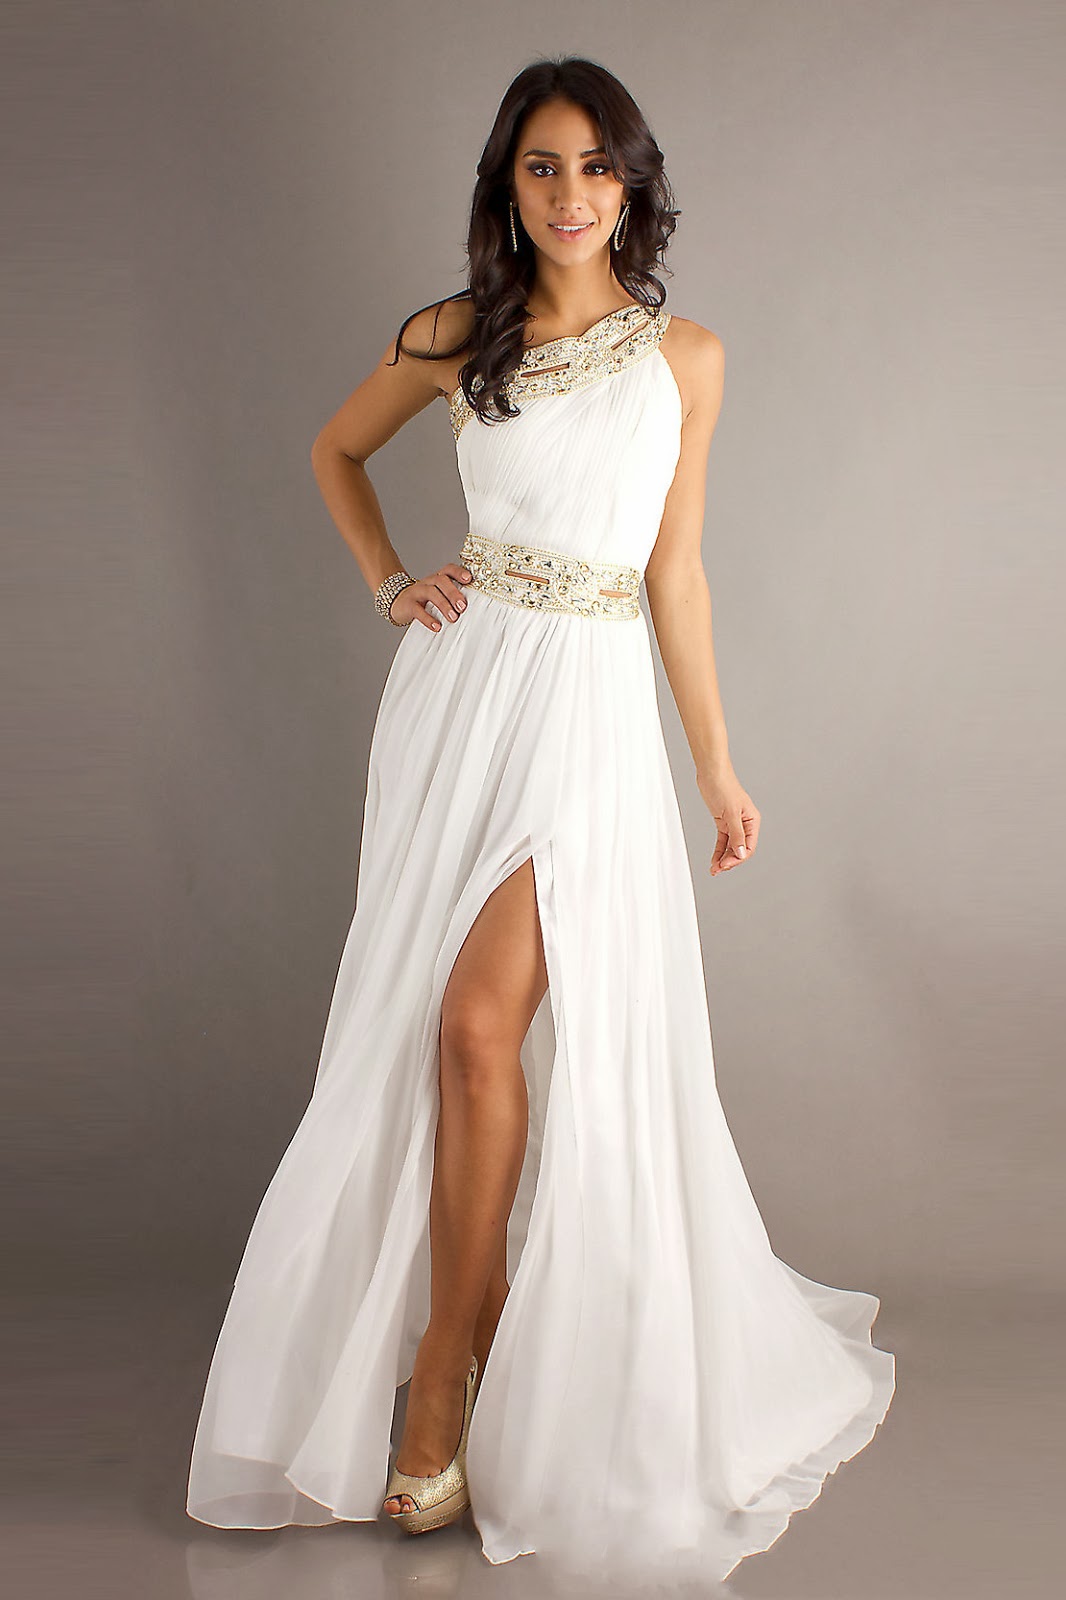 Beautiful White Prom Dresses Pictures